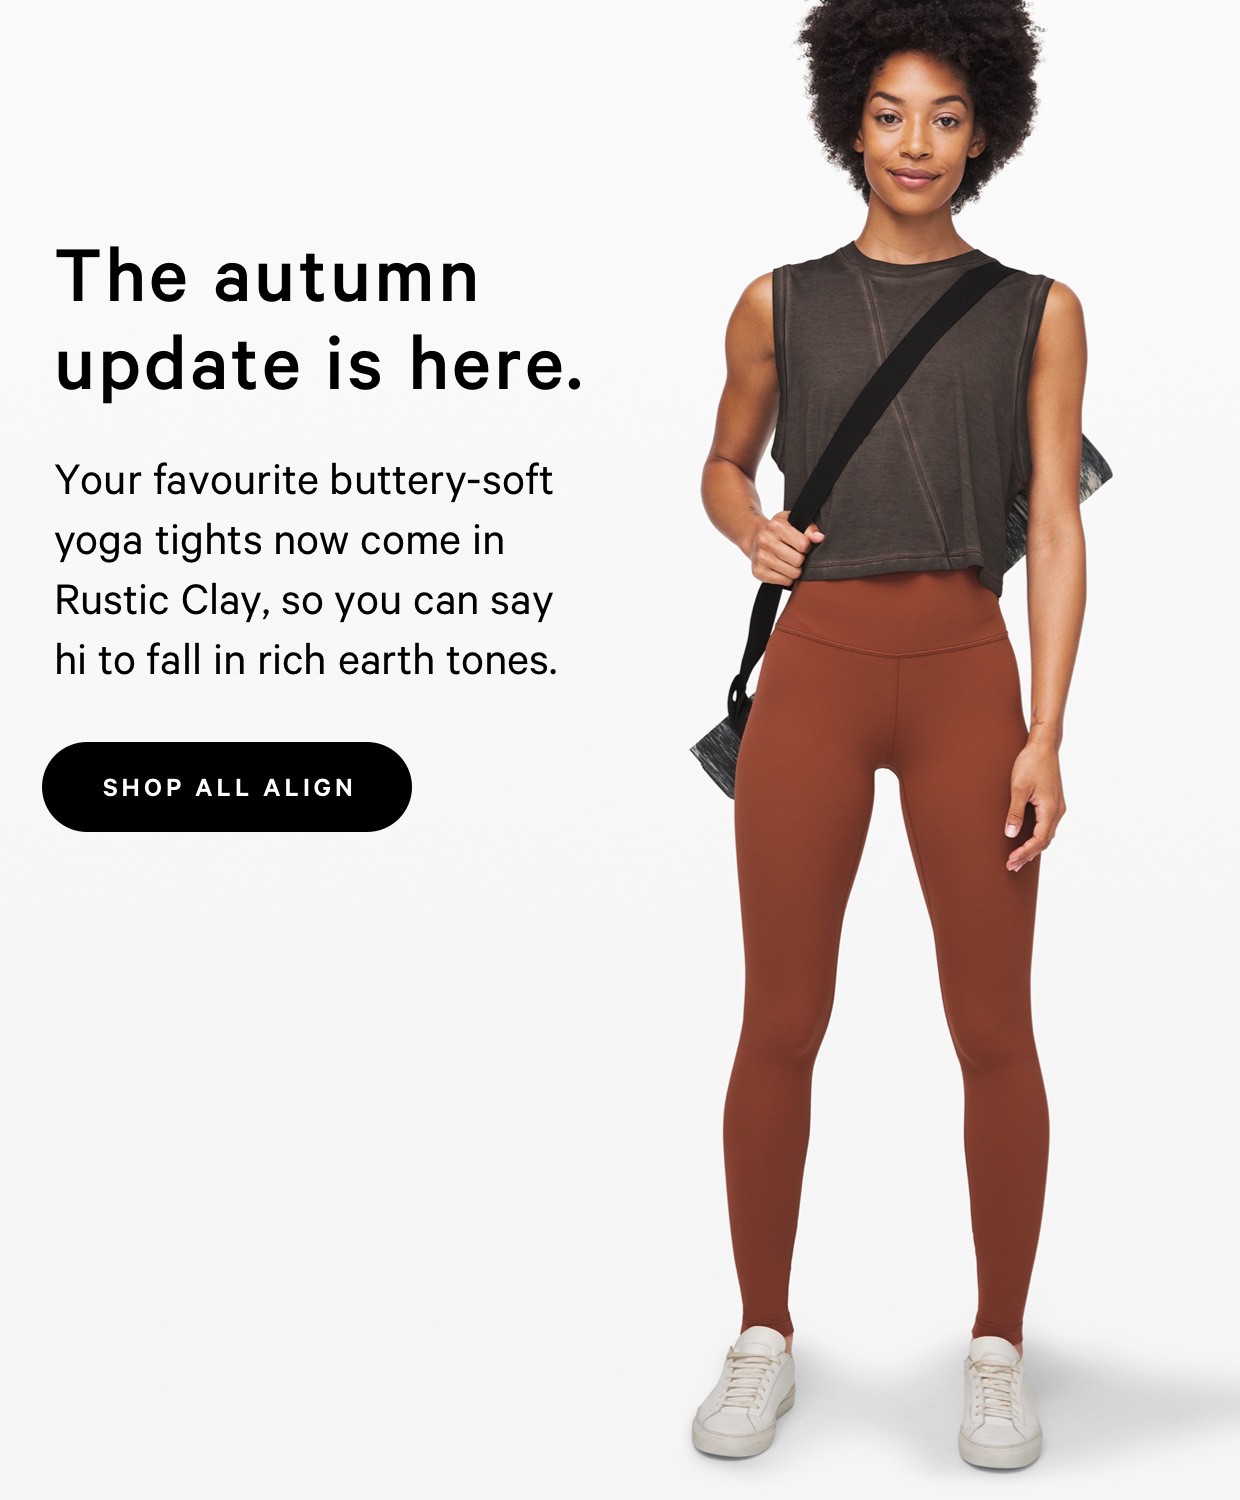 The autumn update is here. - SHOP ALL ALIGN